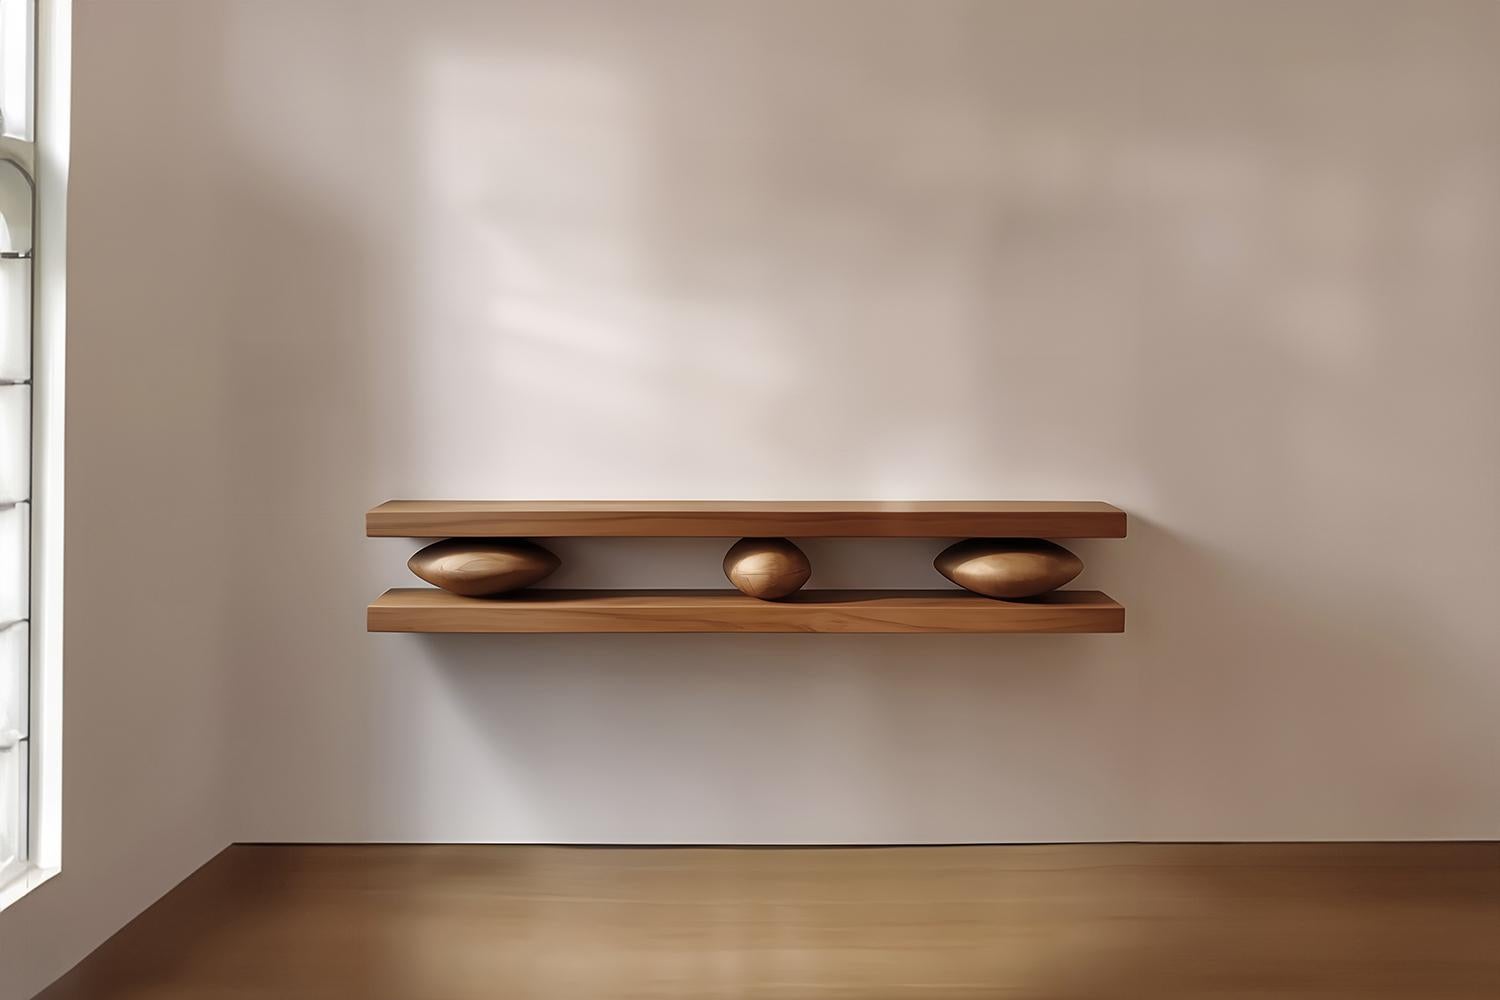 Set of Two Large Floating Shelves with Three Sculptural Wooden Pebble Accents in the Middle, Sereno by Joel Escalona

—

What happens when the practical becomes art?
What happens when ornamentation gains significance?

Those were the